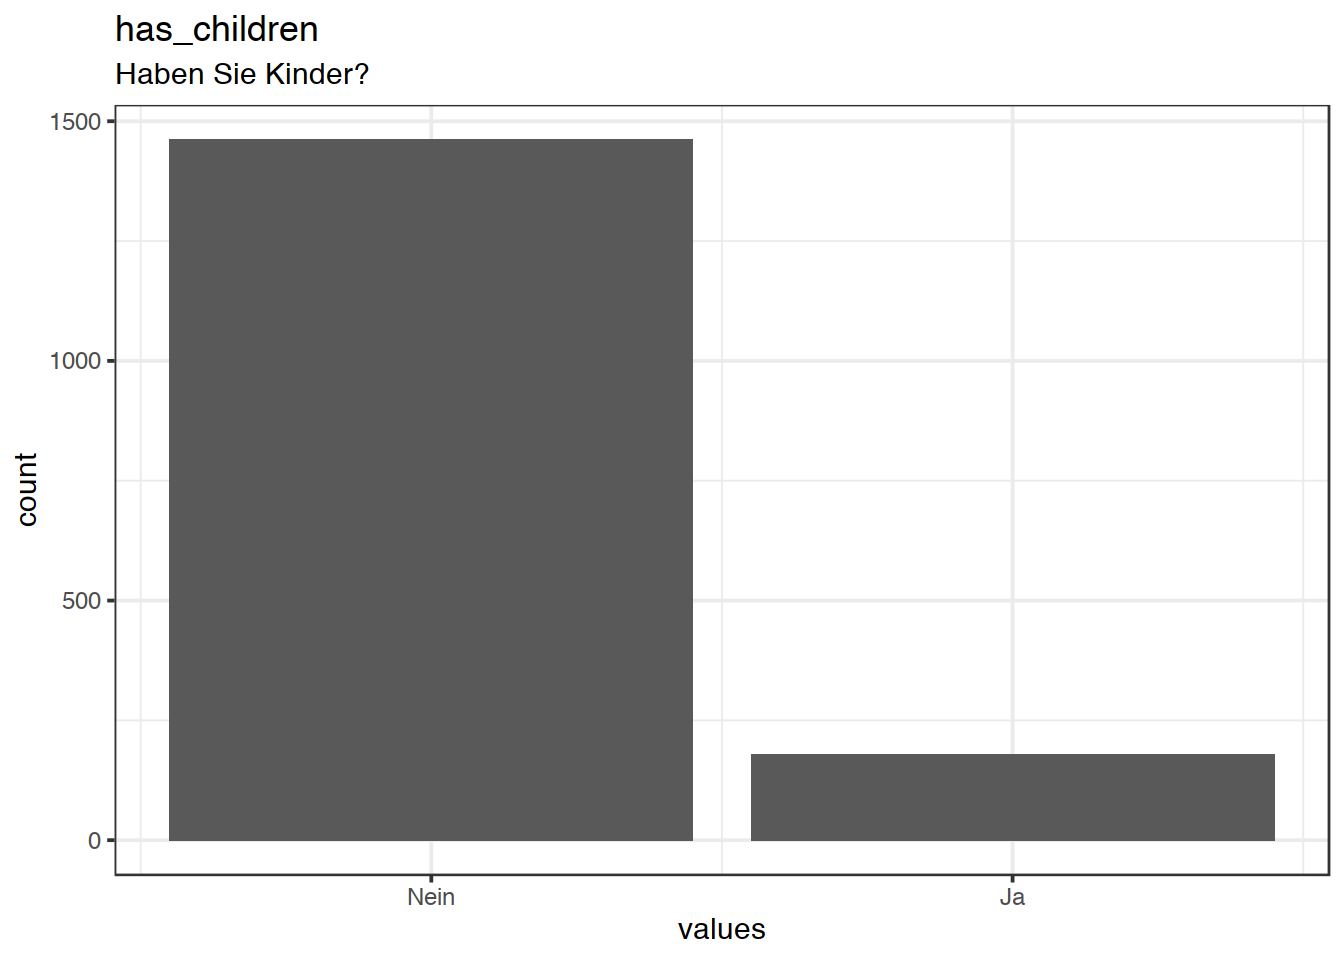 Distribution of values for has_children